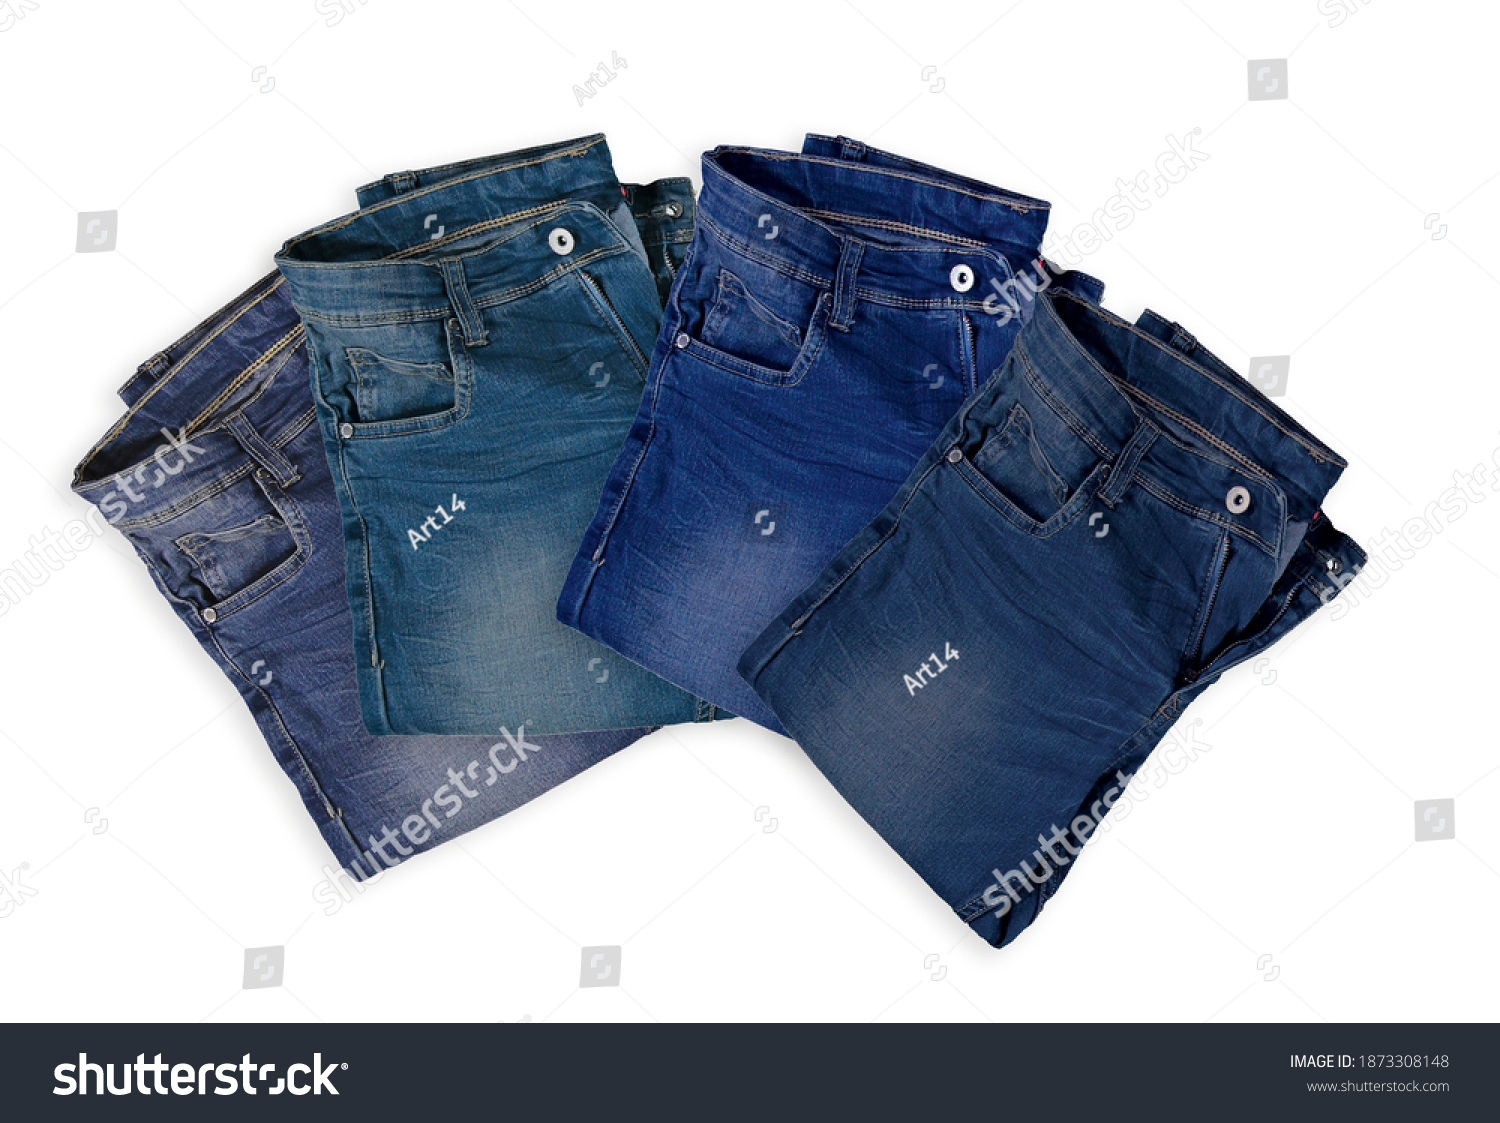 63 Codpiece on jeans Images, Stock Photos & Vectors | Shutterstock